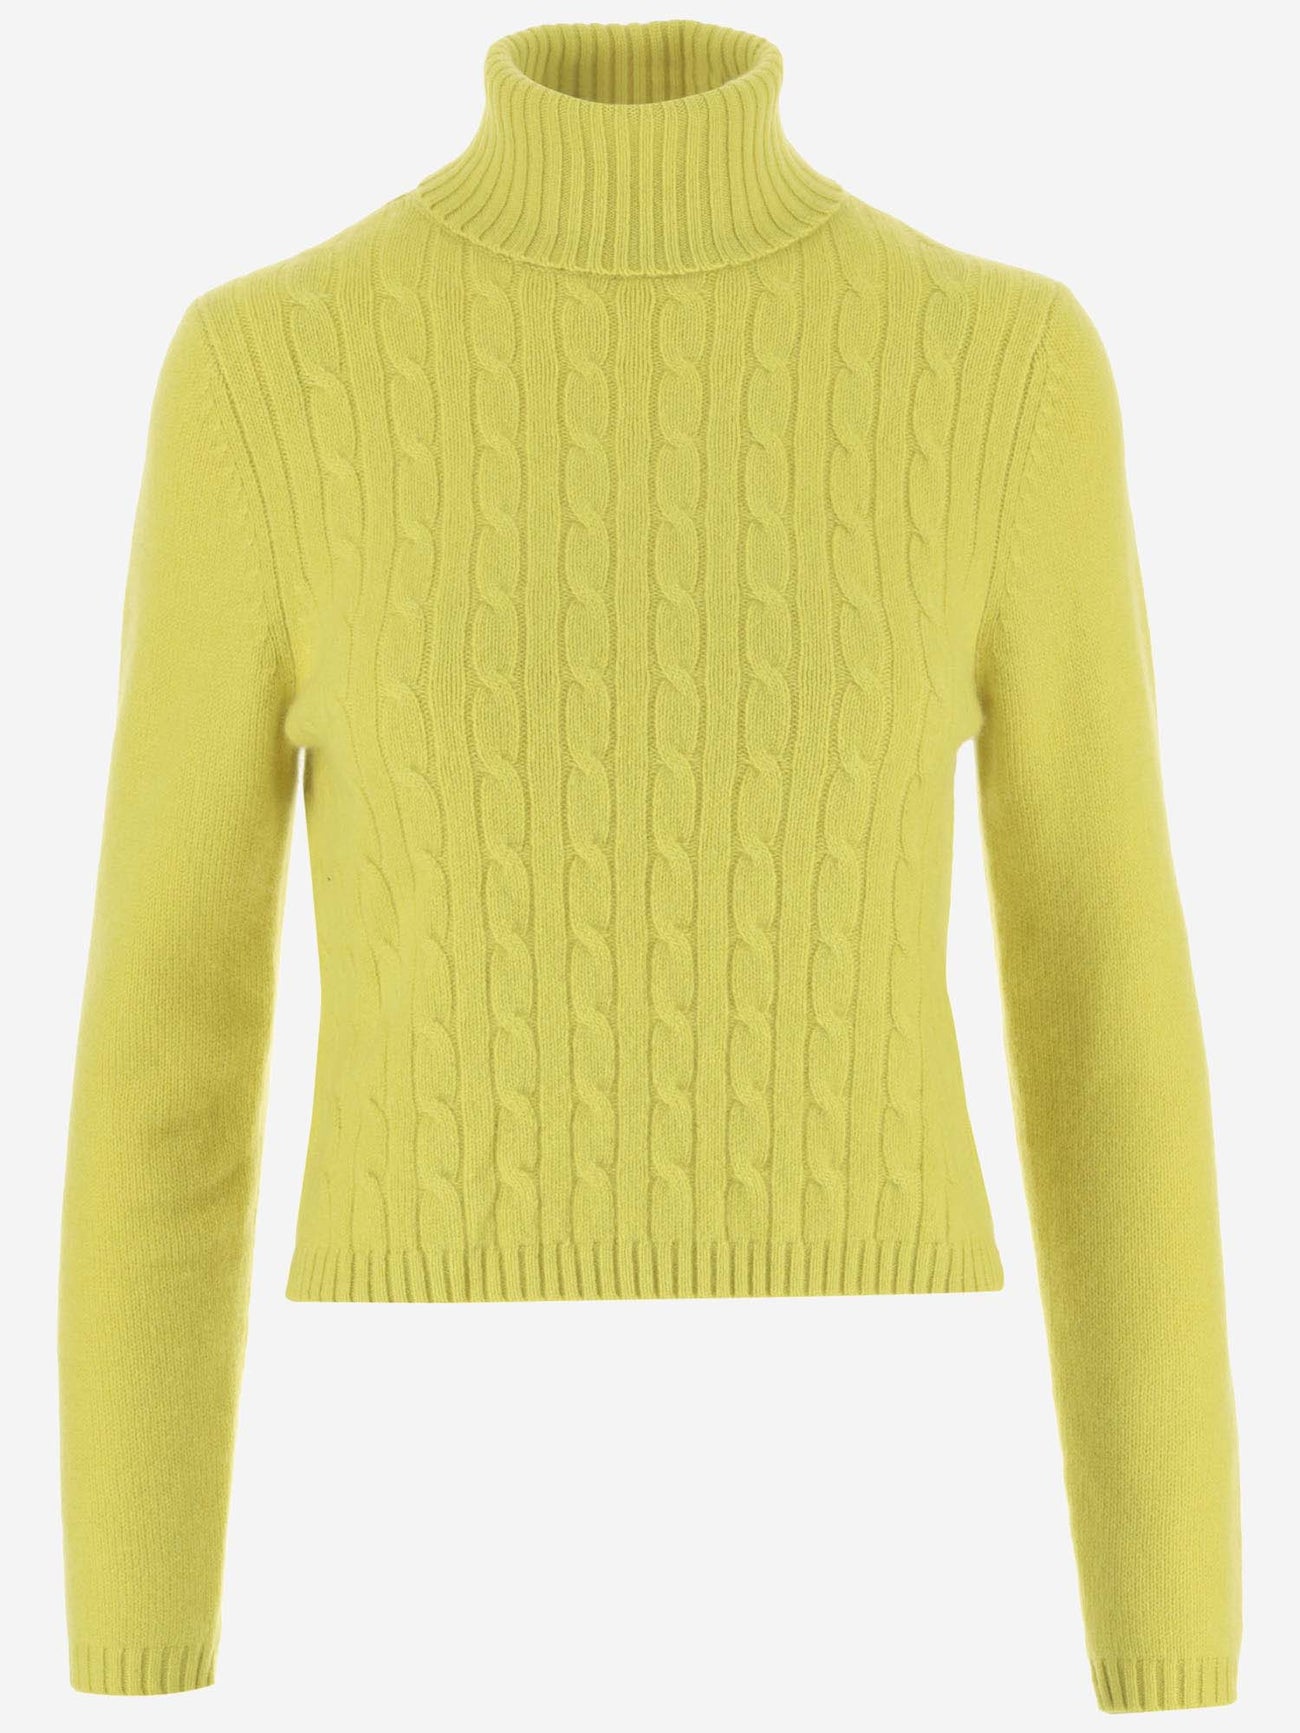 Allude, Cashmere-Blend Ribbed Sweater